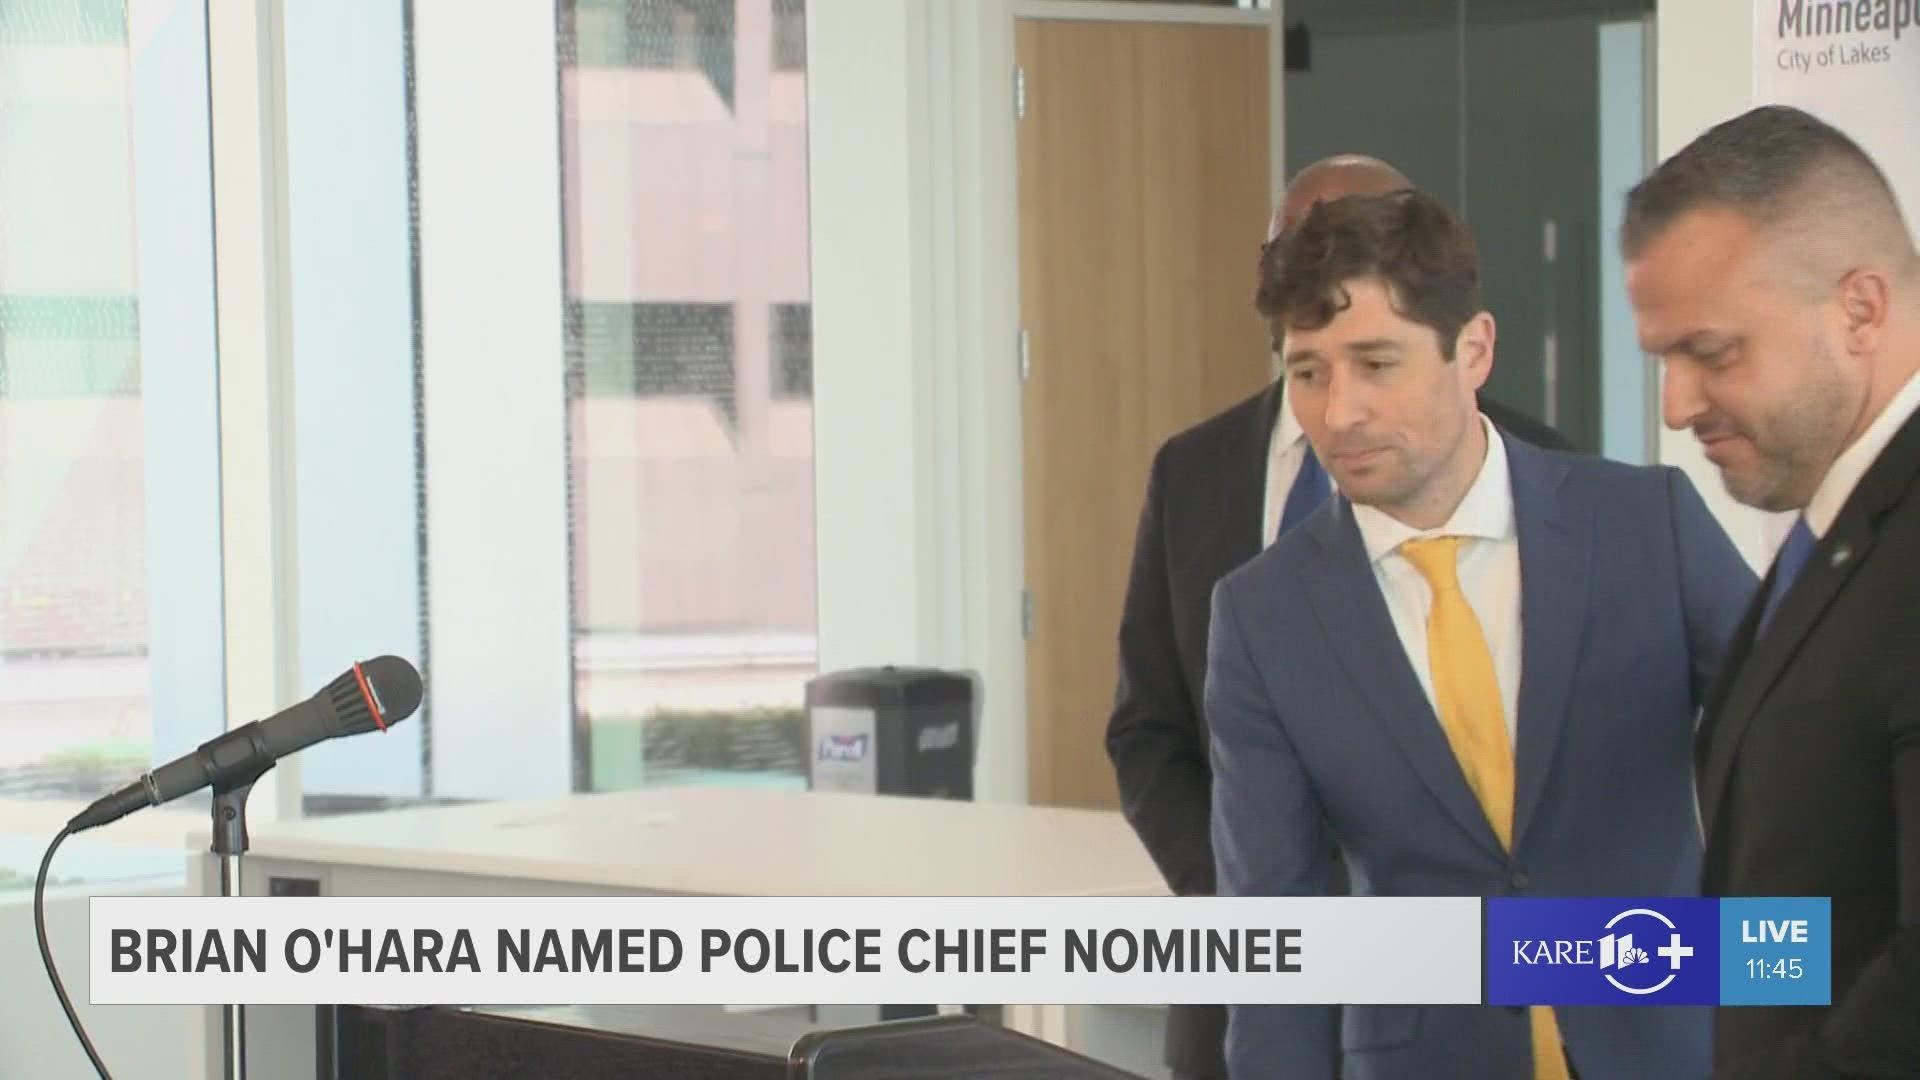 After a comprehensive 6-month search Minneapolis Mayor Jacob Frey has nominated Brian O'Hara, current deputy mayor in Newark, as his new police chief.